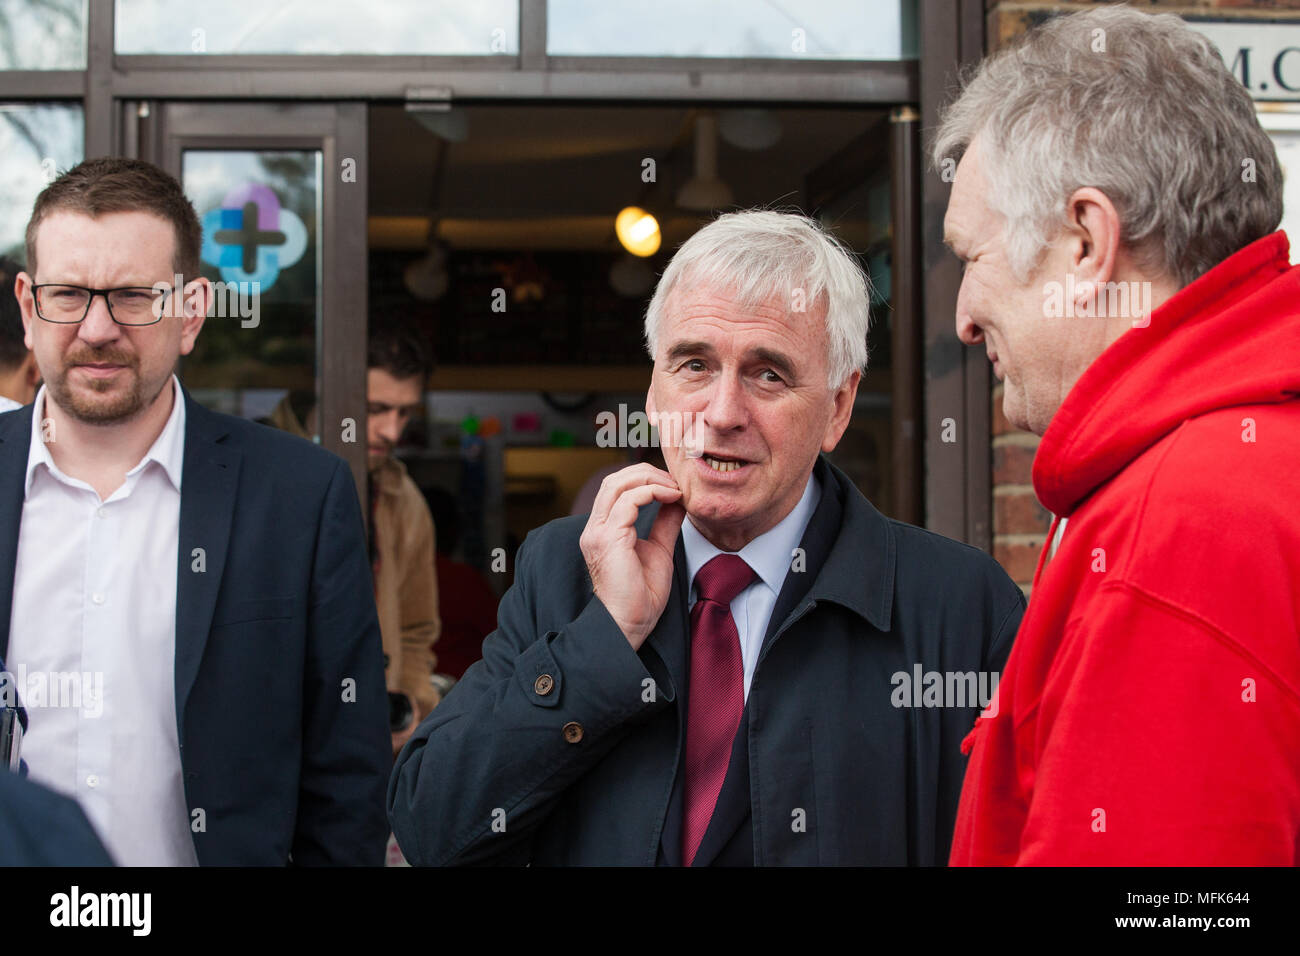 West Drayton, UK. 26th April, 2018. Shadow Chancellor John McDonnell joins local election campaigning for the Labour Party in Hillingdon with Shadow Secretary of State for Communities and Local Government Andrew Gwynne. Credit: Mark Kerrison/Alamy Live News Stock Photo